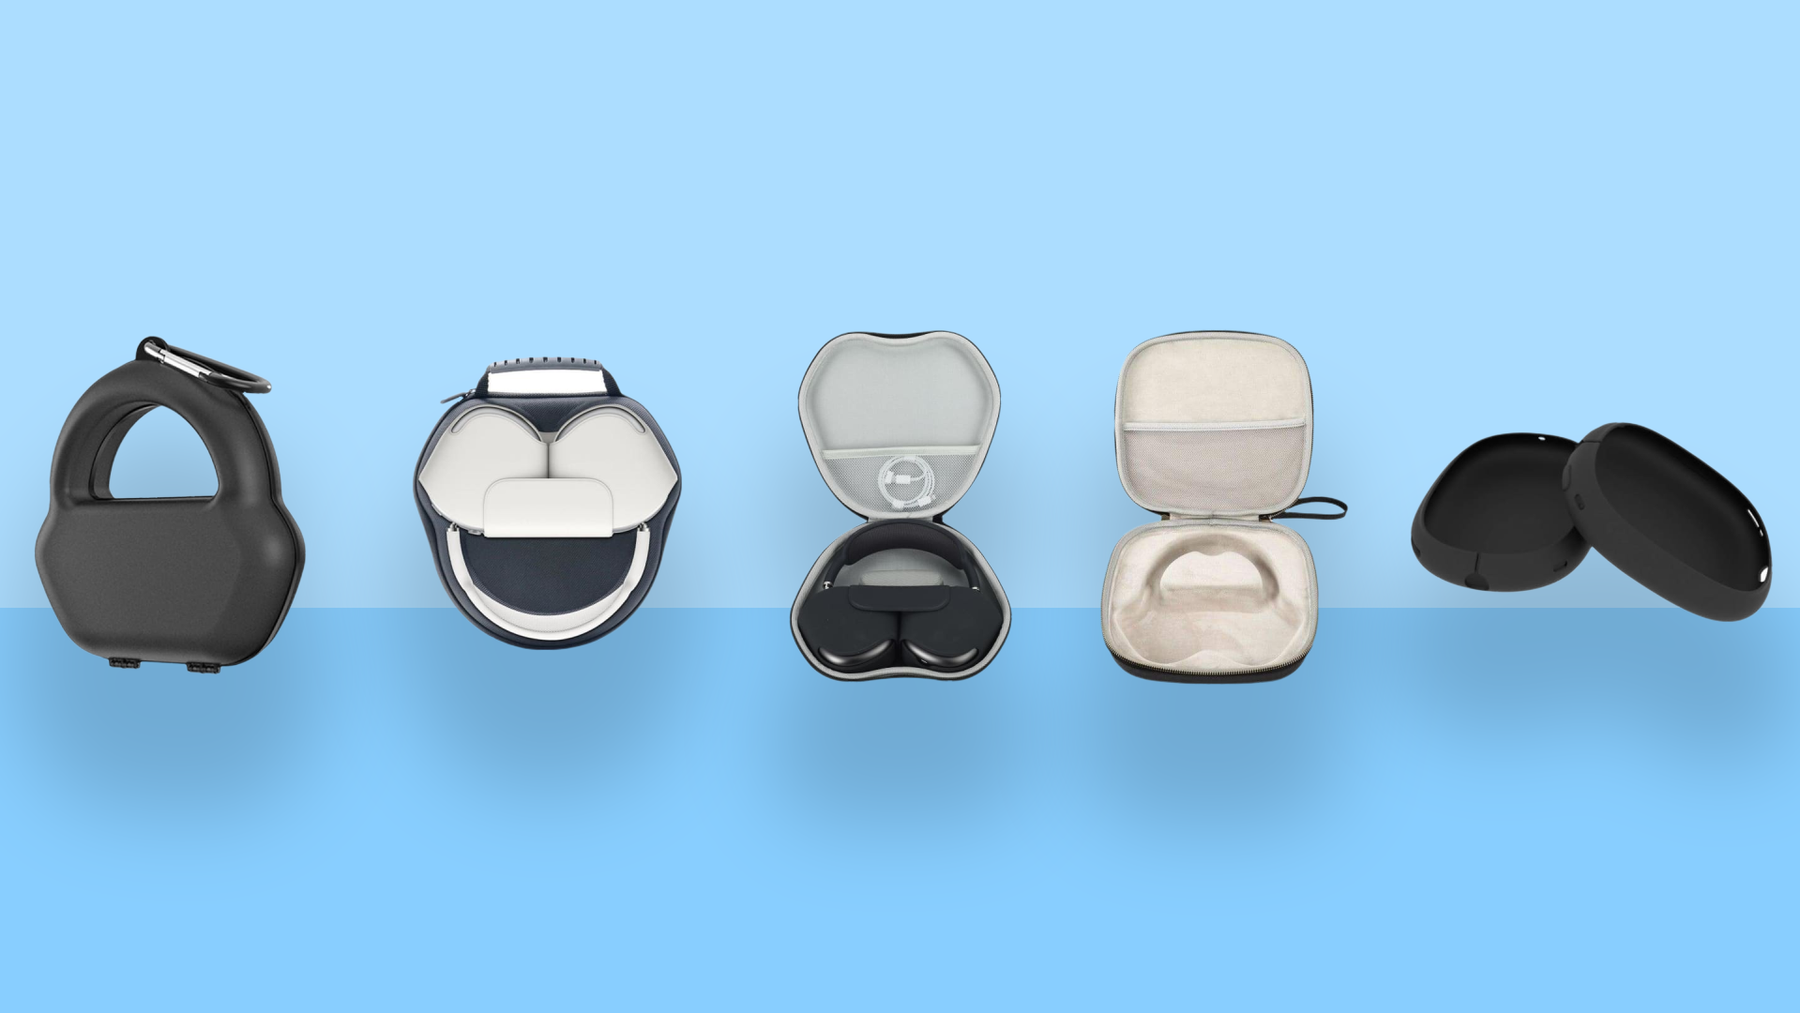 Keep Your AirPods Max Safe and Stylish with These Top 5 Covers